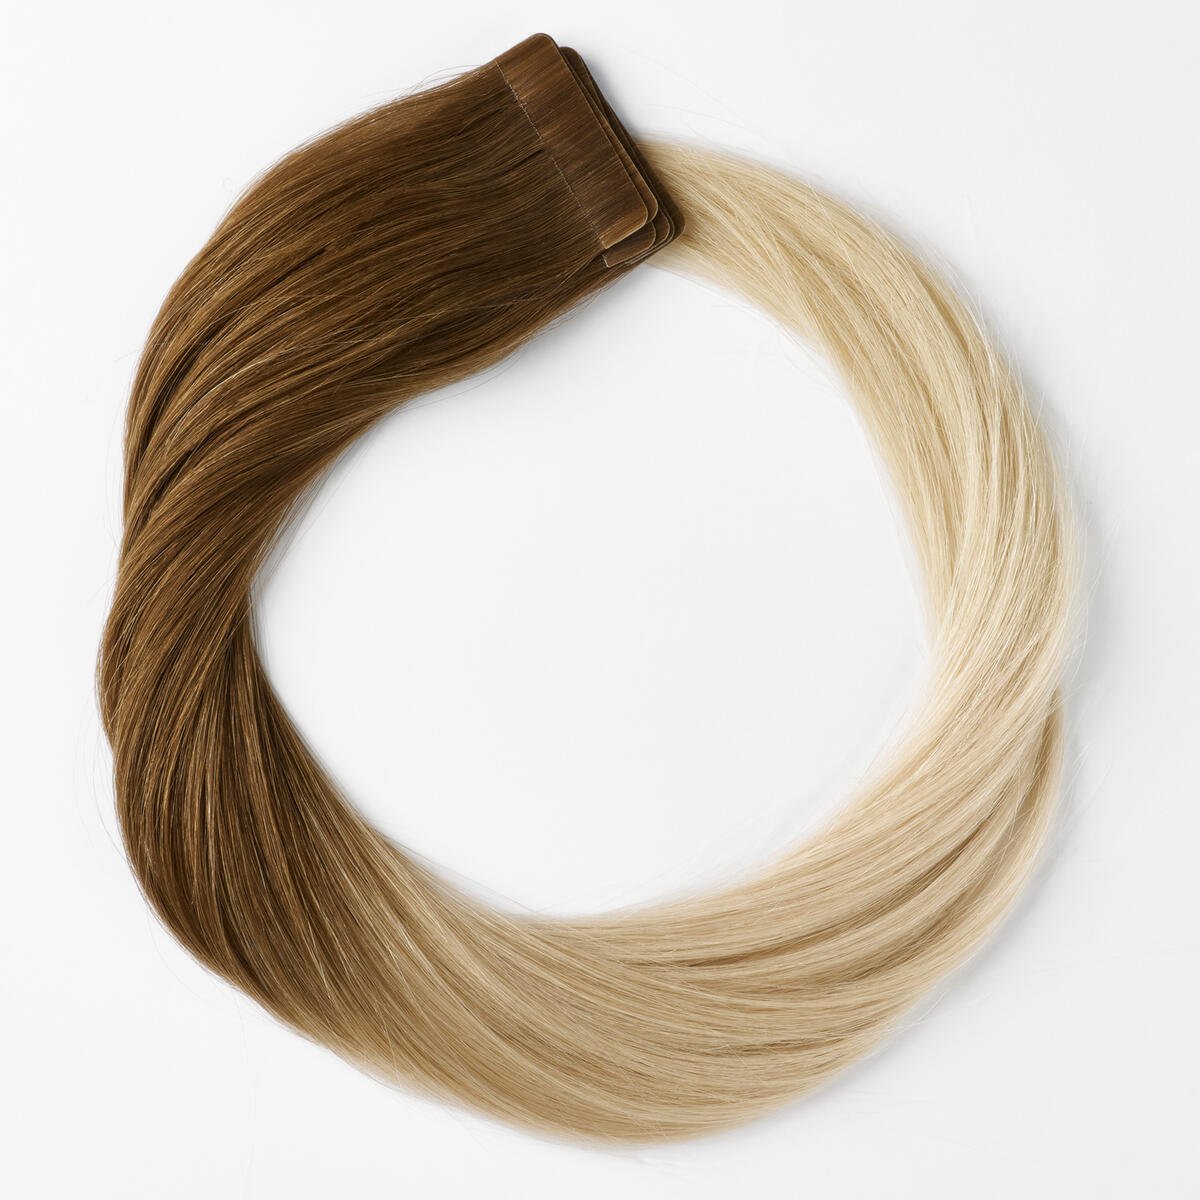 Basic Tape Extensions